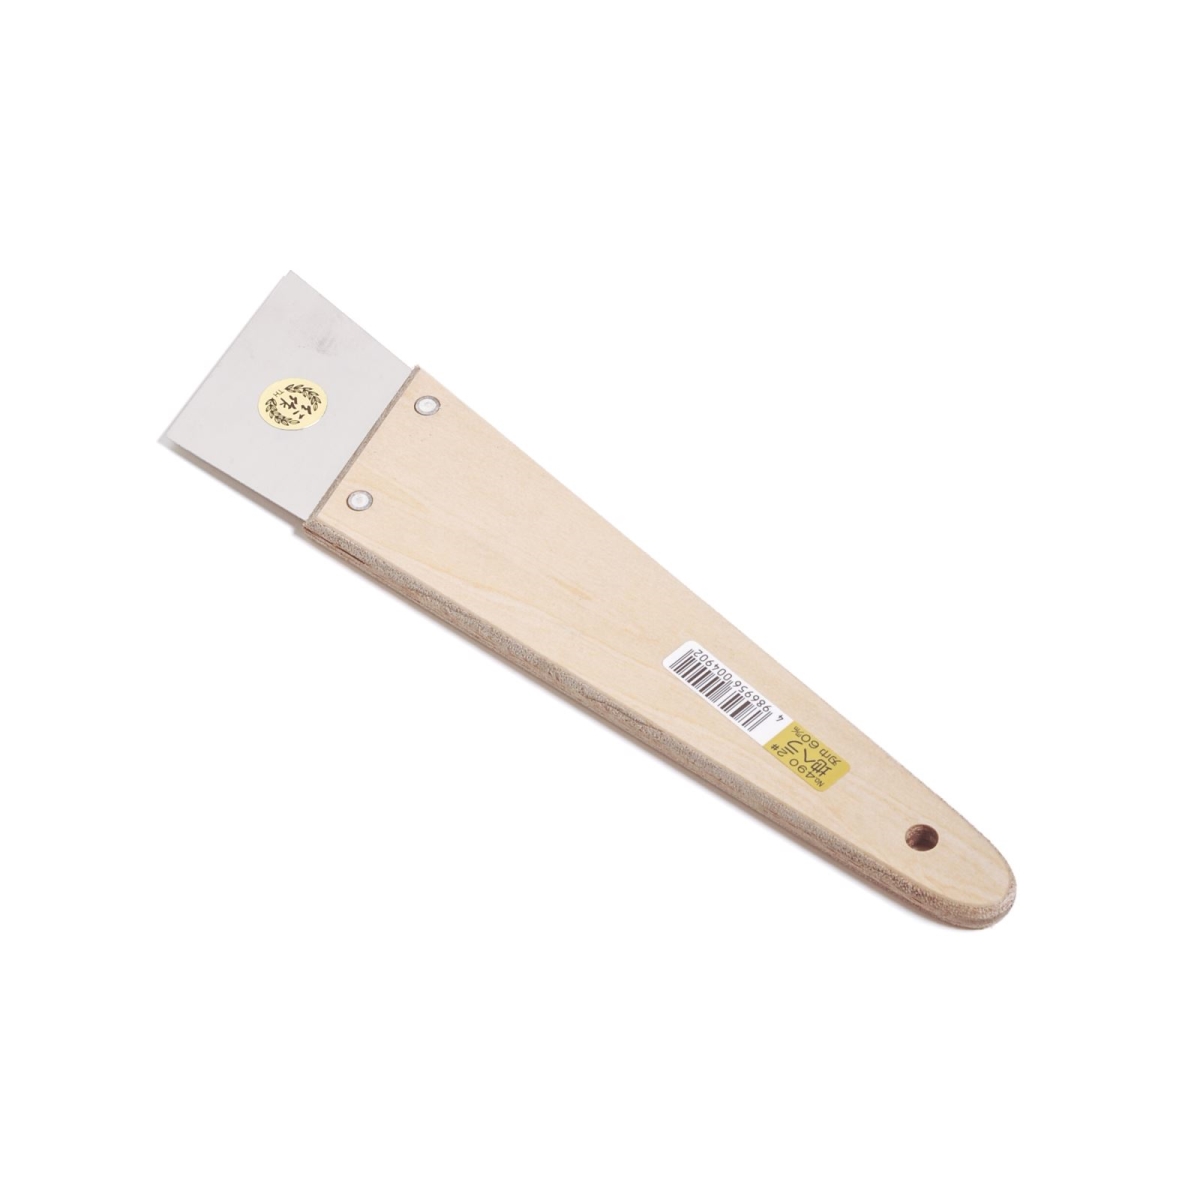 Njp490 2.25 In. Blade Stainless Steel Putty Knife